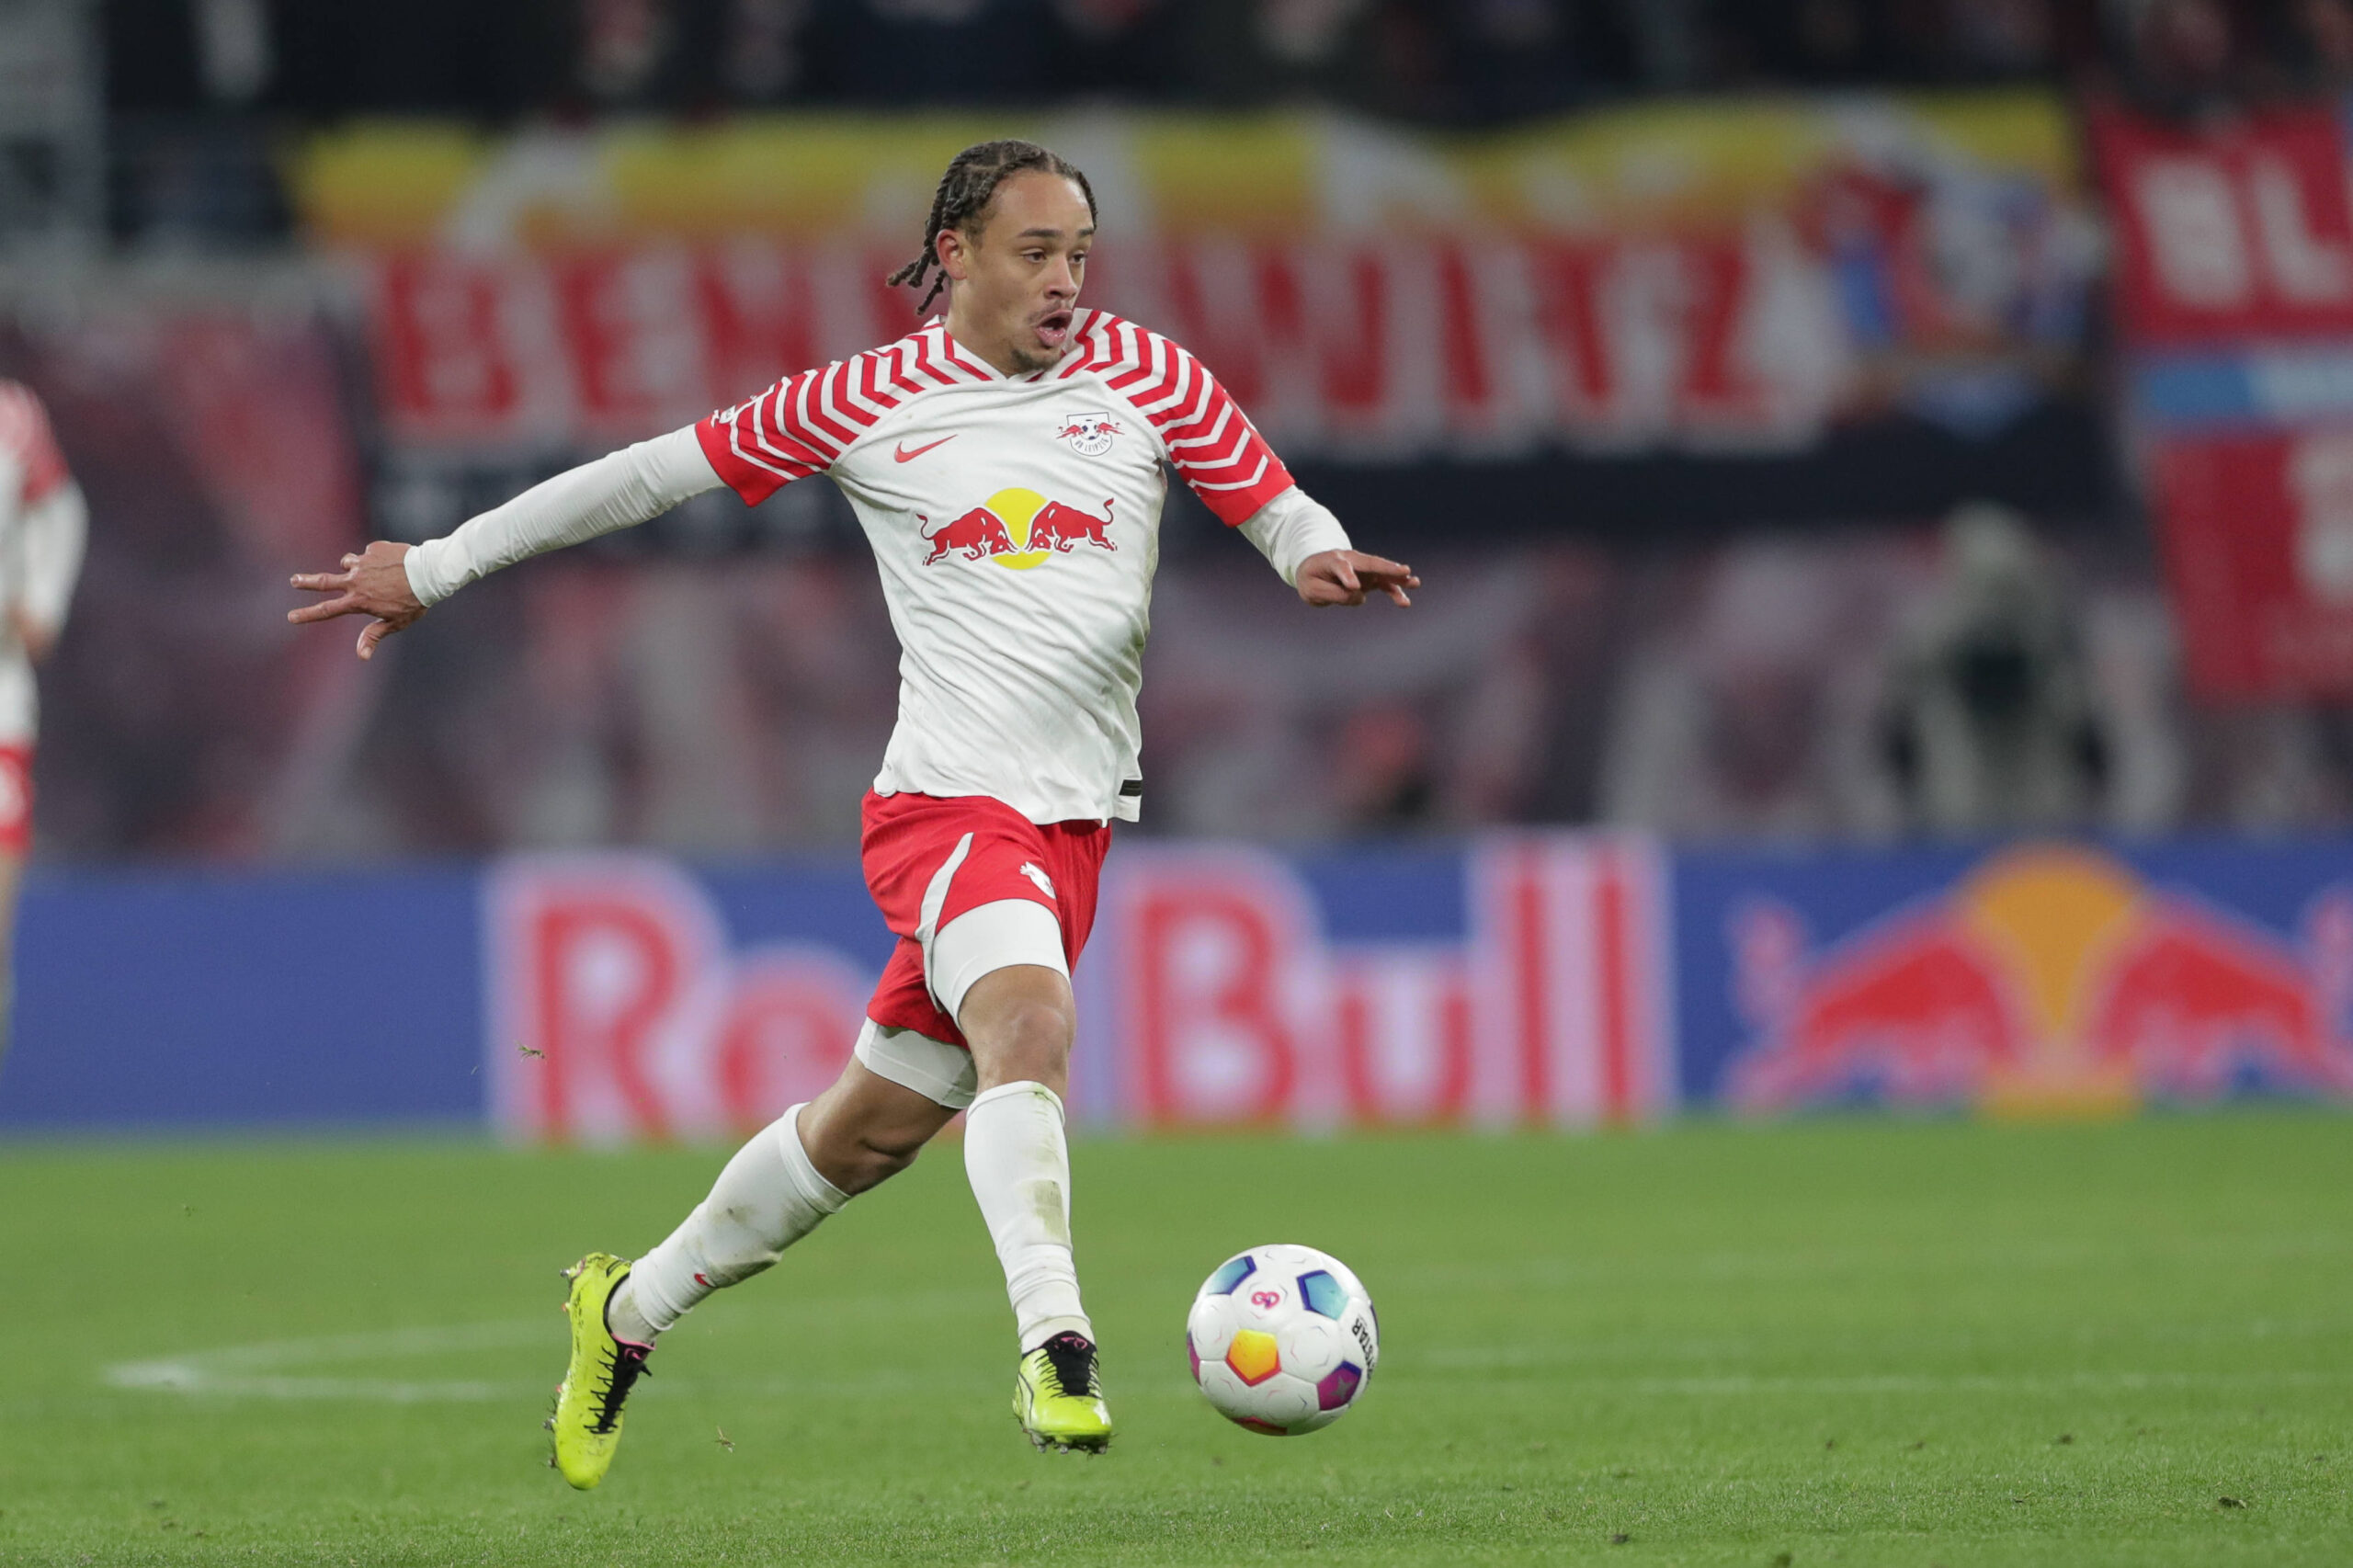 Arsenal have been linked with a move for RB Leipzig's Xavi Simons